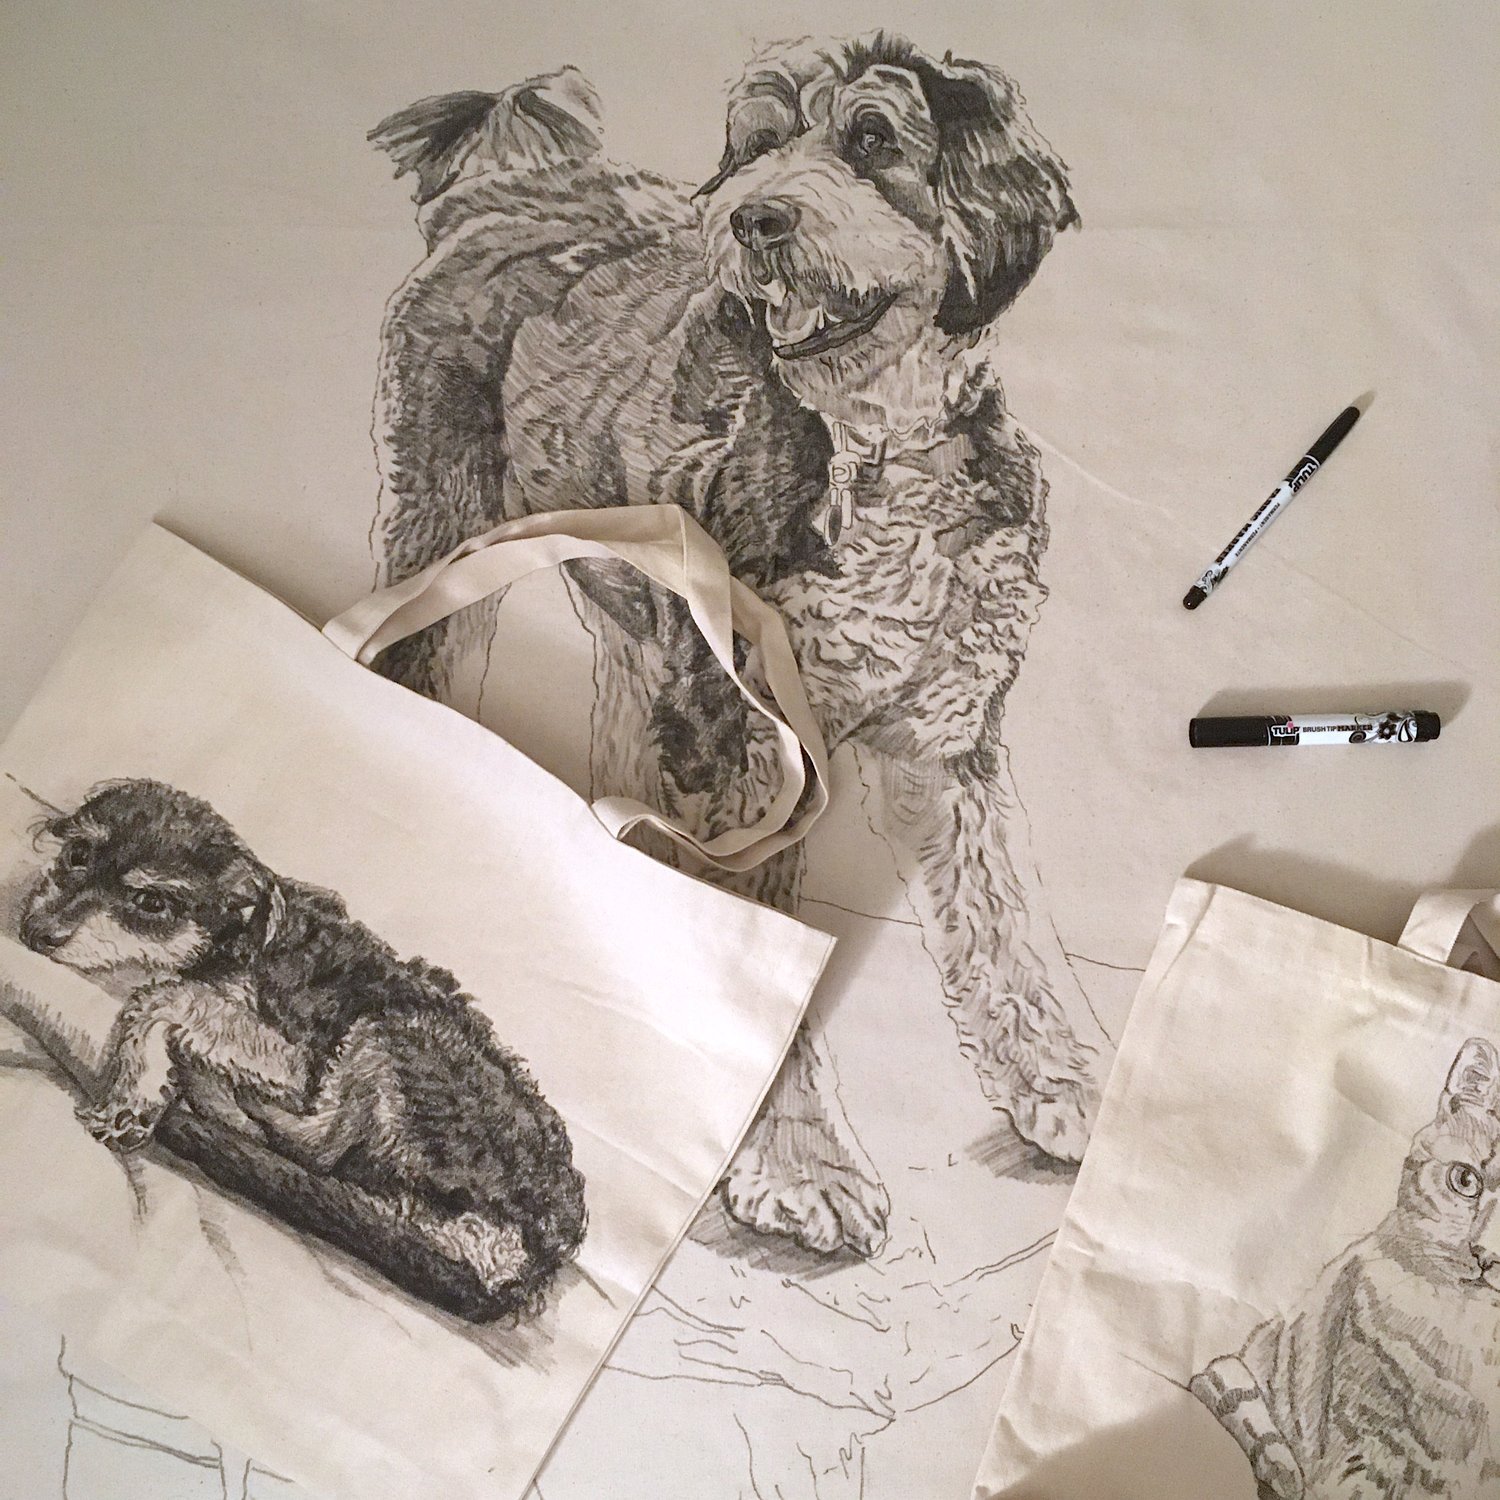 Image of Pet Tote Bag Commission